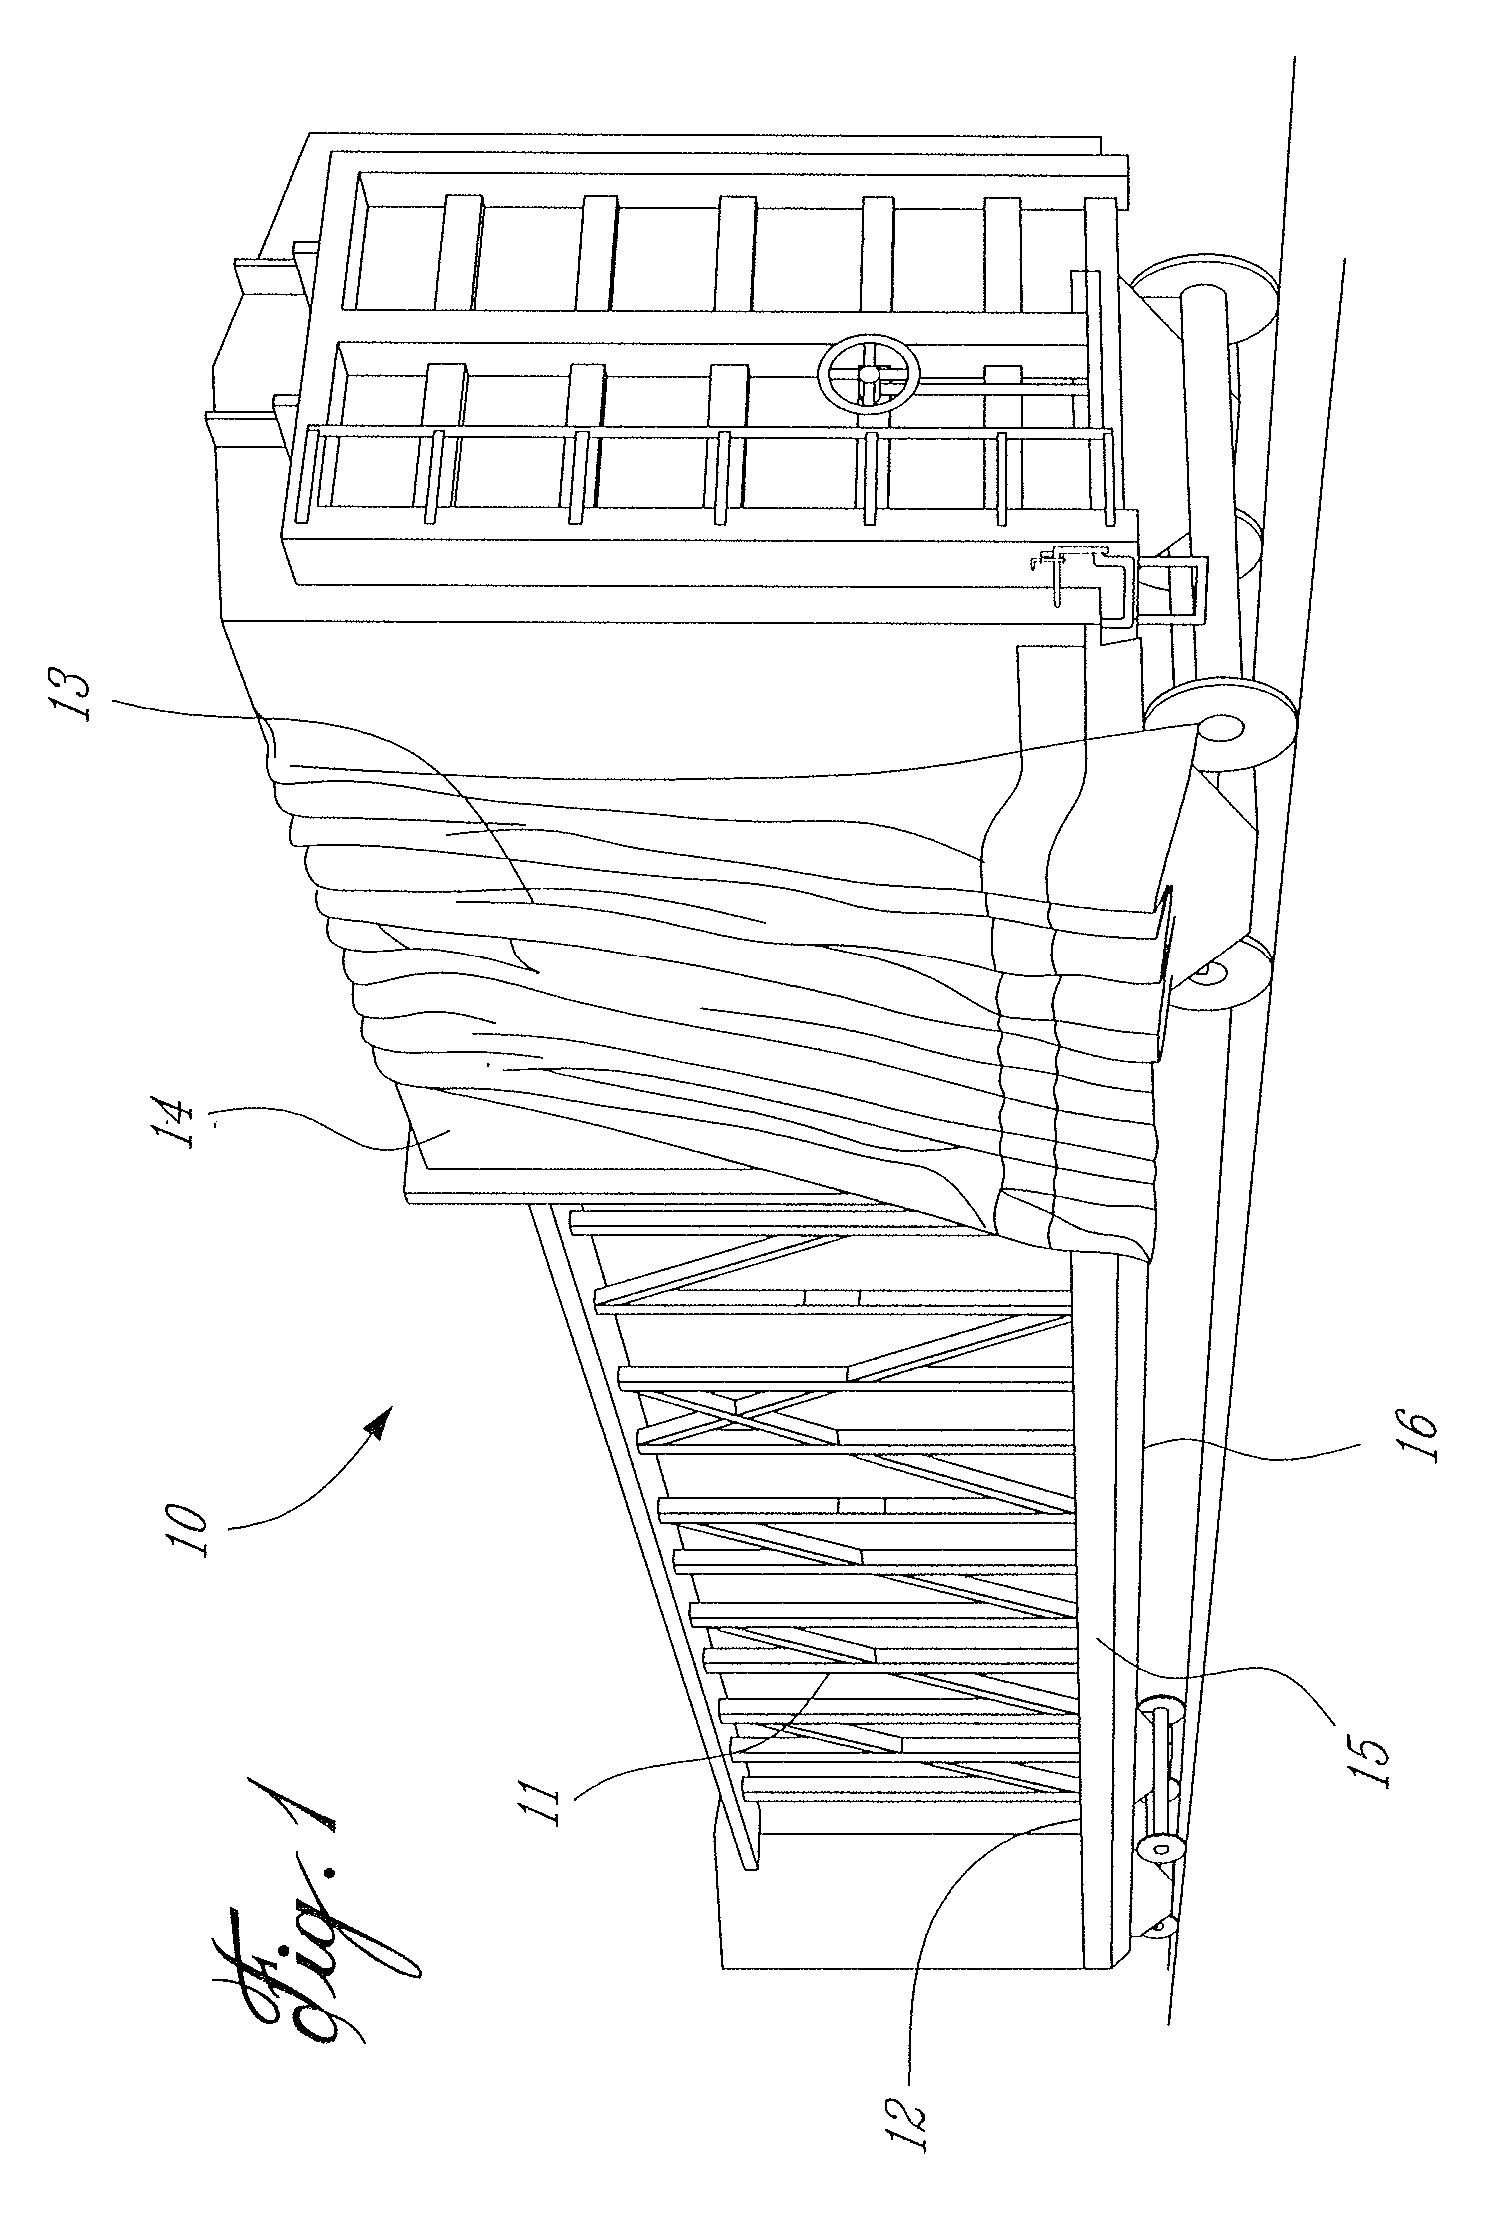 Shield assembly for cargo space of a transport vehicle